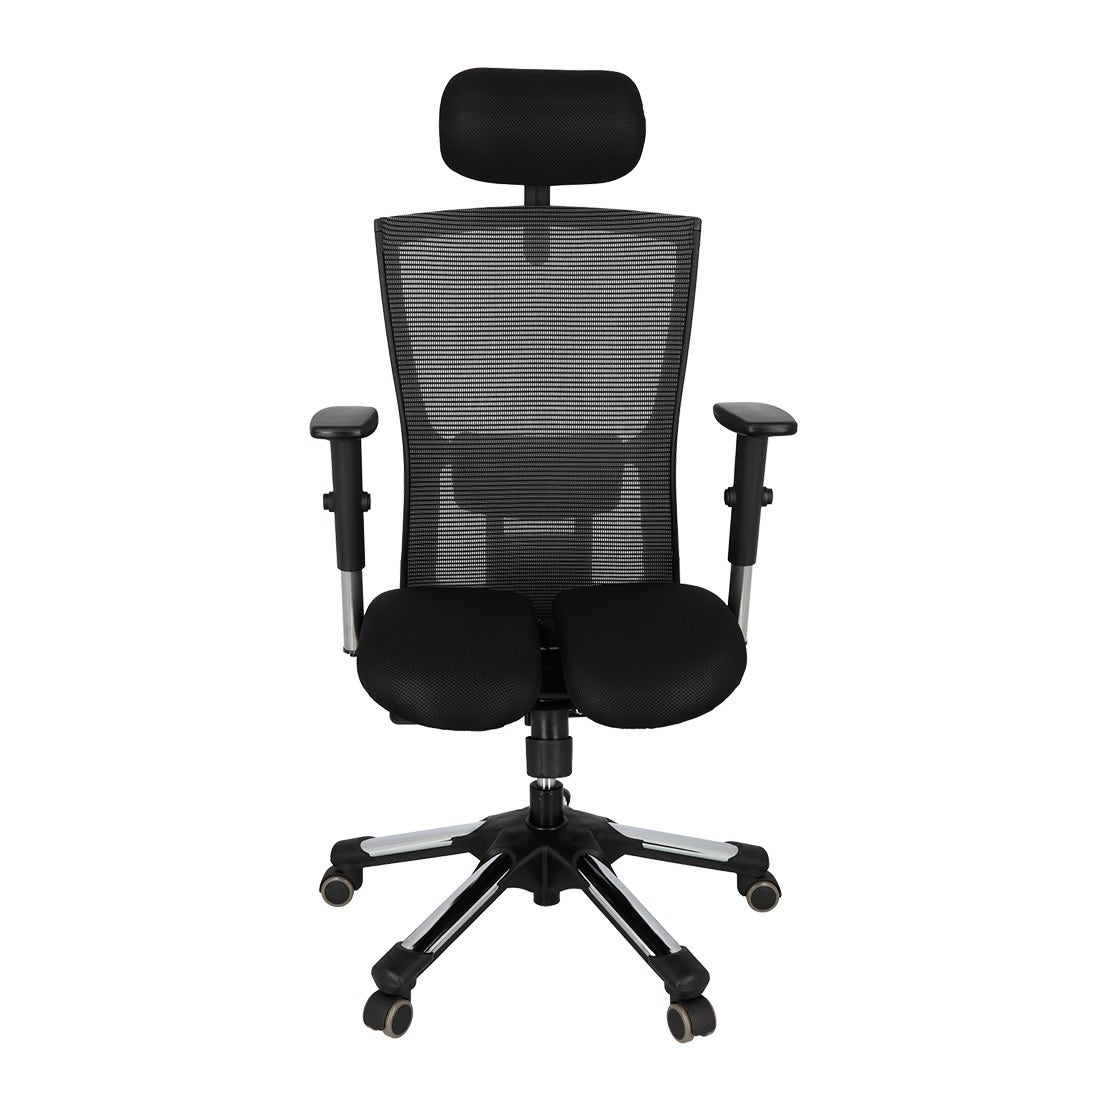 39014951-furniture-home-office-gaming-office-chair-01